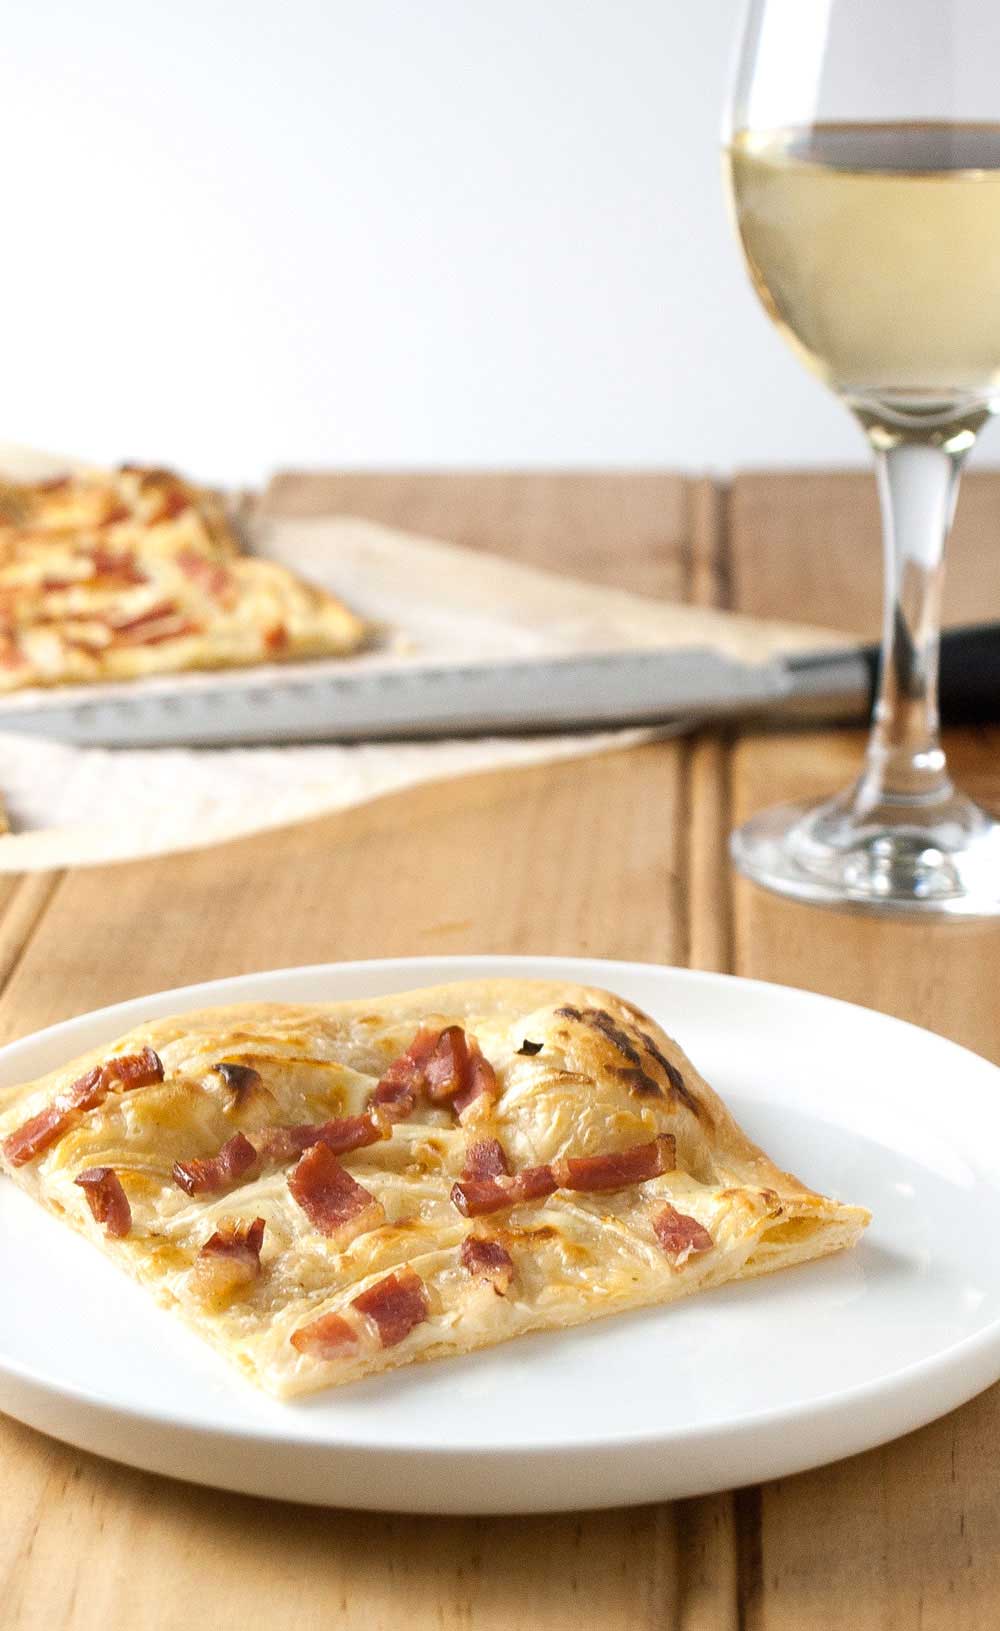 Flammekueche. Bacon and Onion Tart. A delicious French dish from Alsace.